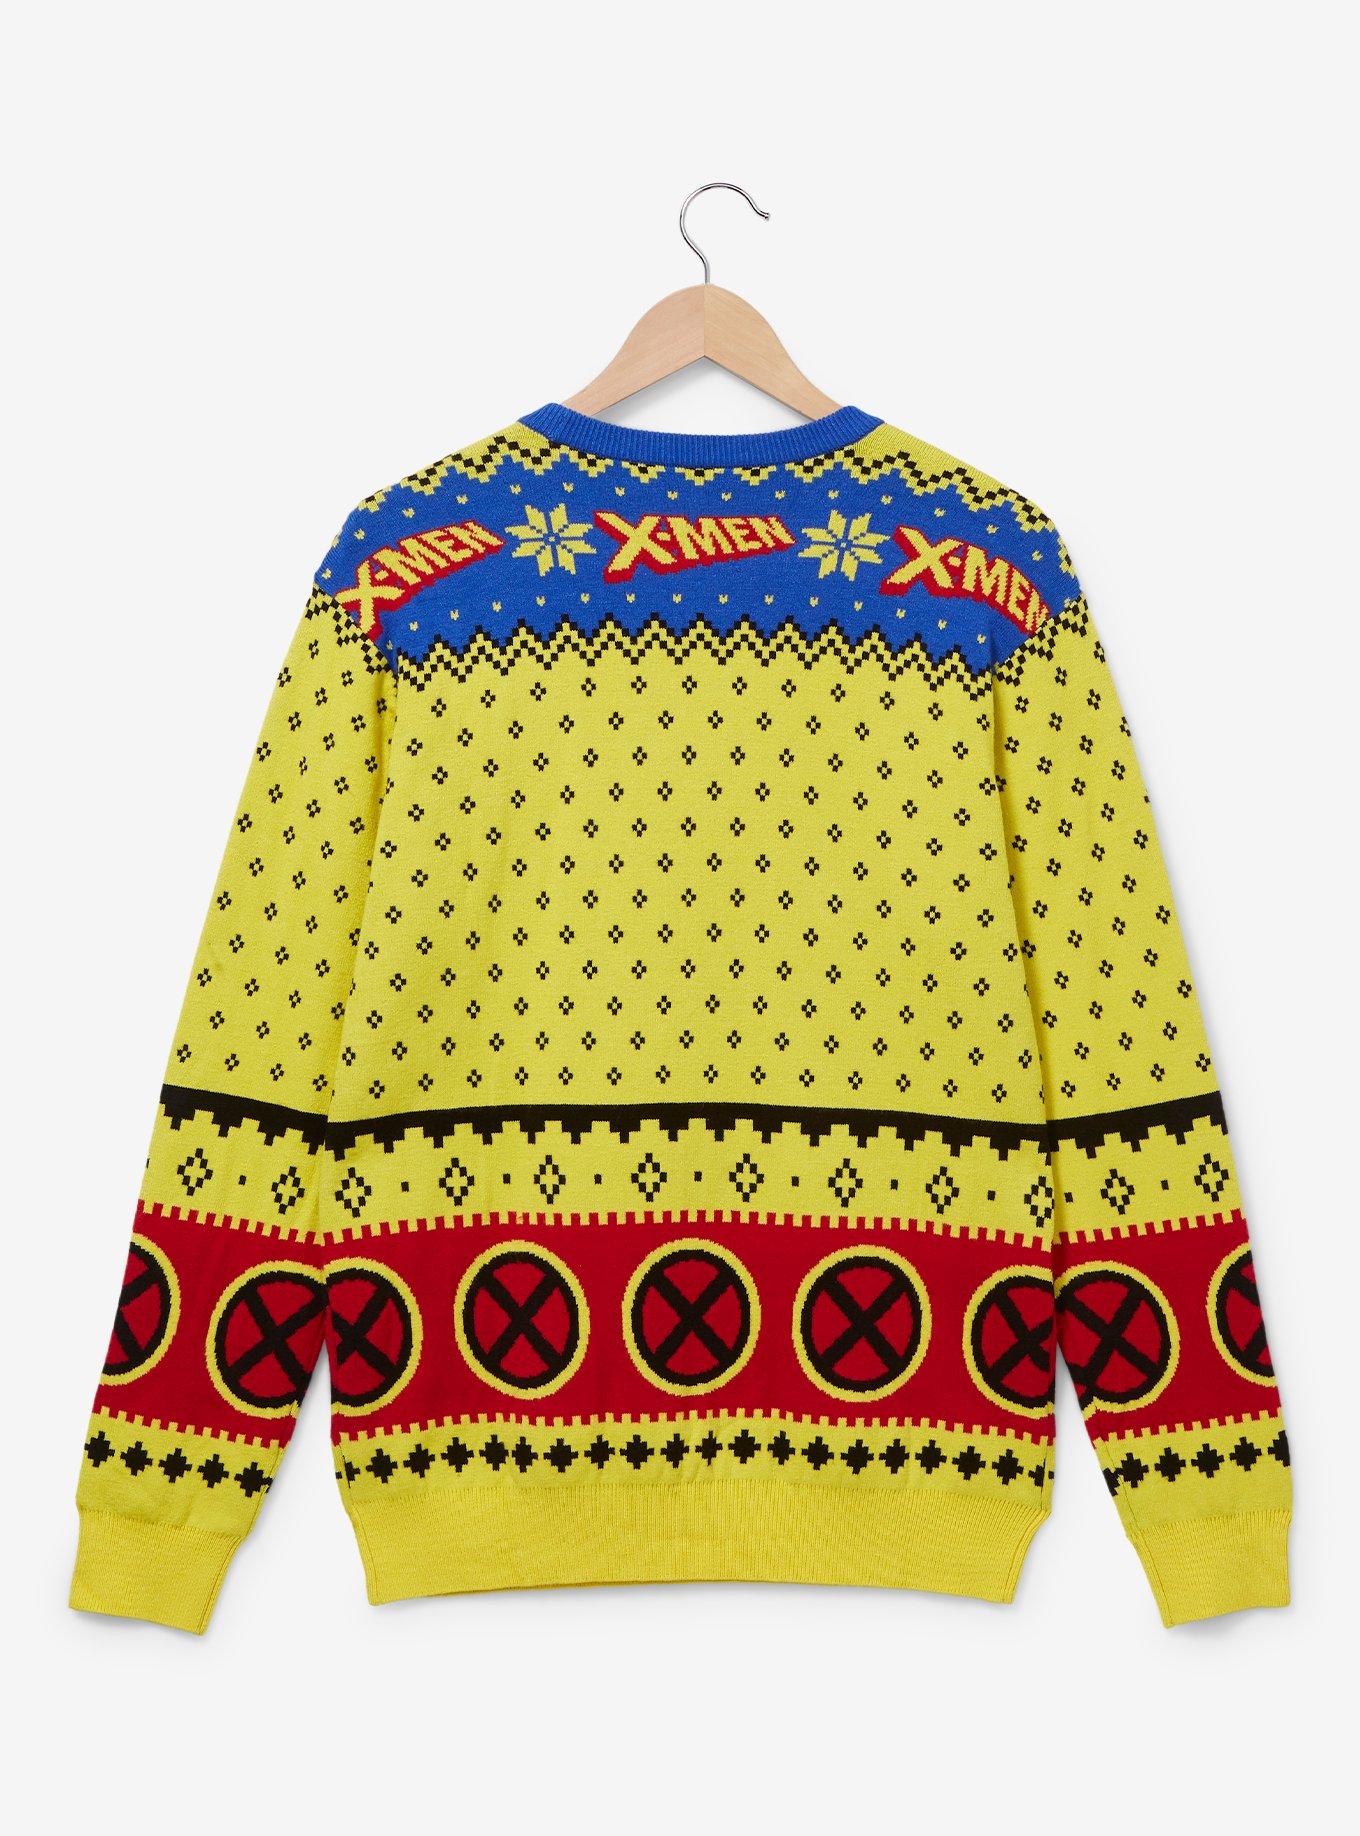 X-Men Wolverine Holiday Sweater - BoxLunch Exclusive, YELLOW, alternate